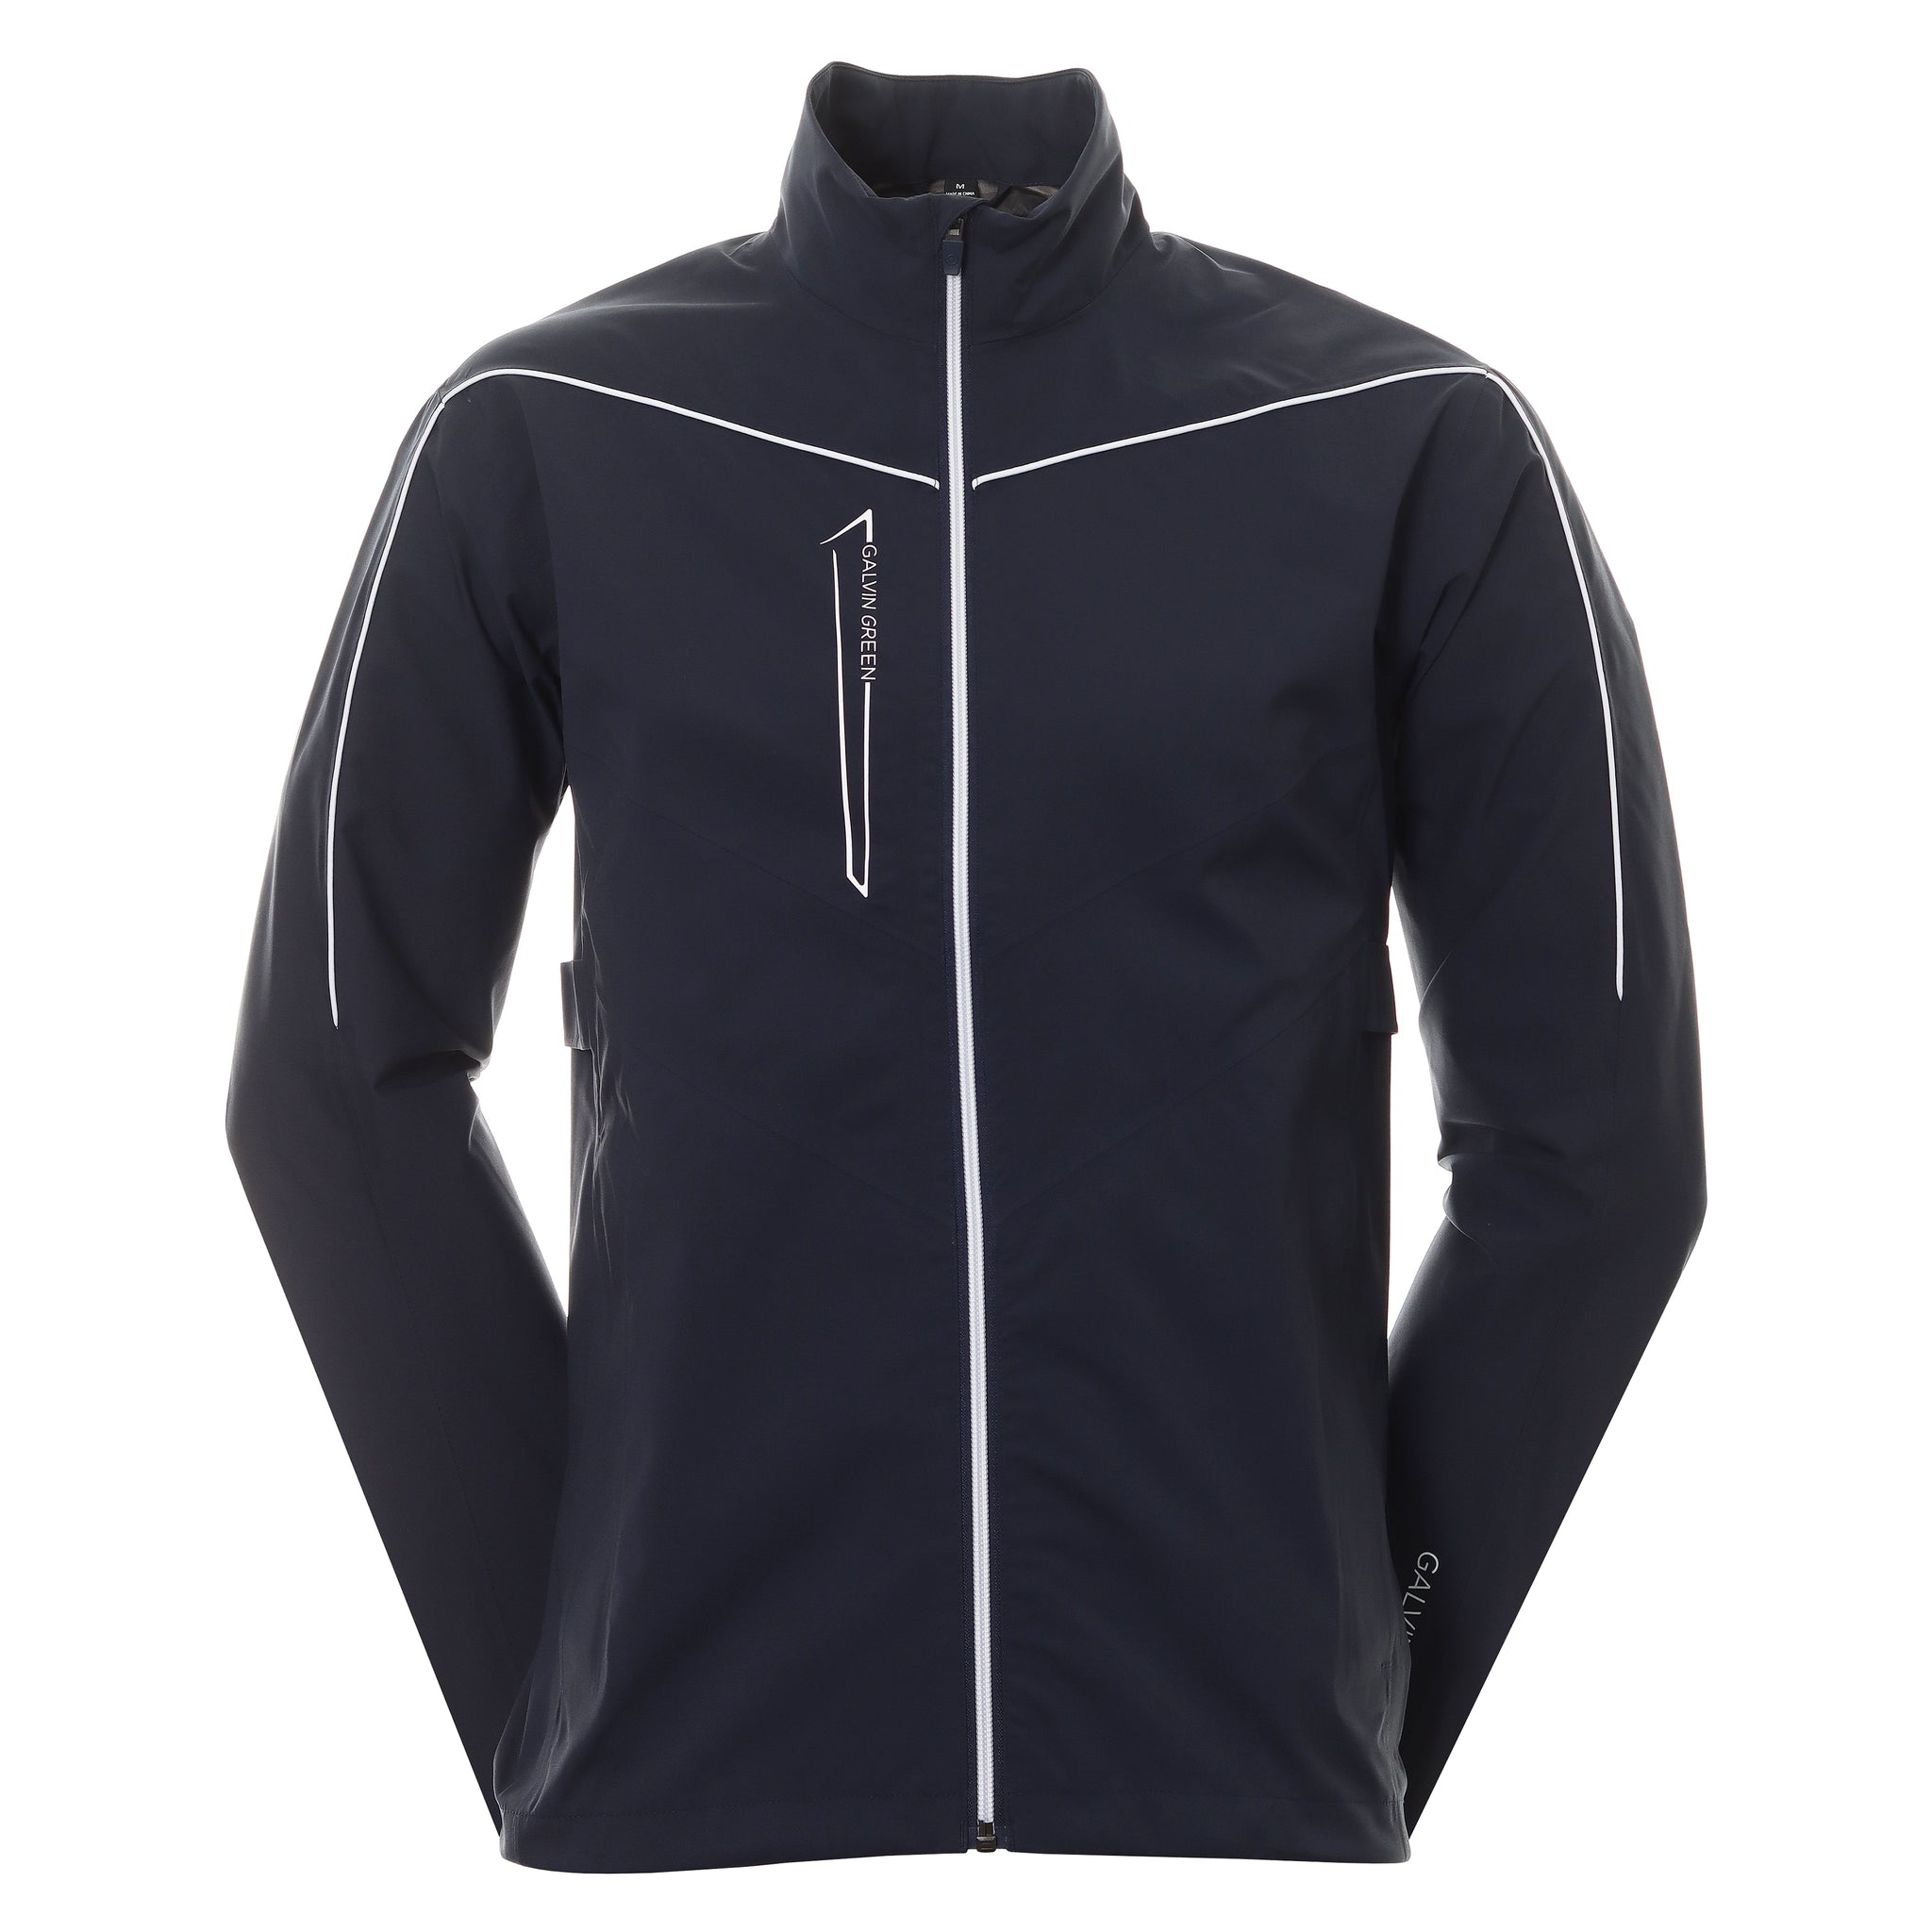 galvin-green-armstrong-paclite-gore-tex-waterproof-golf-jacket-navy-white-9349